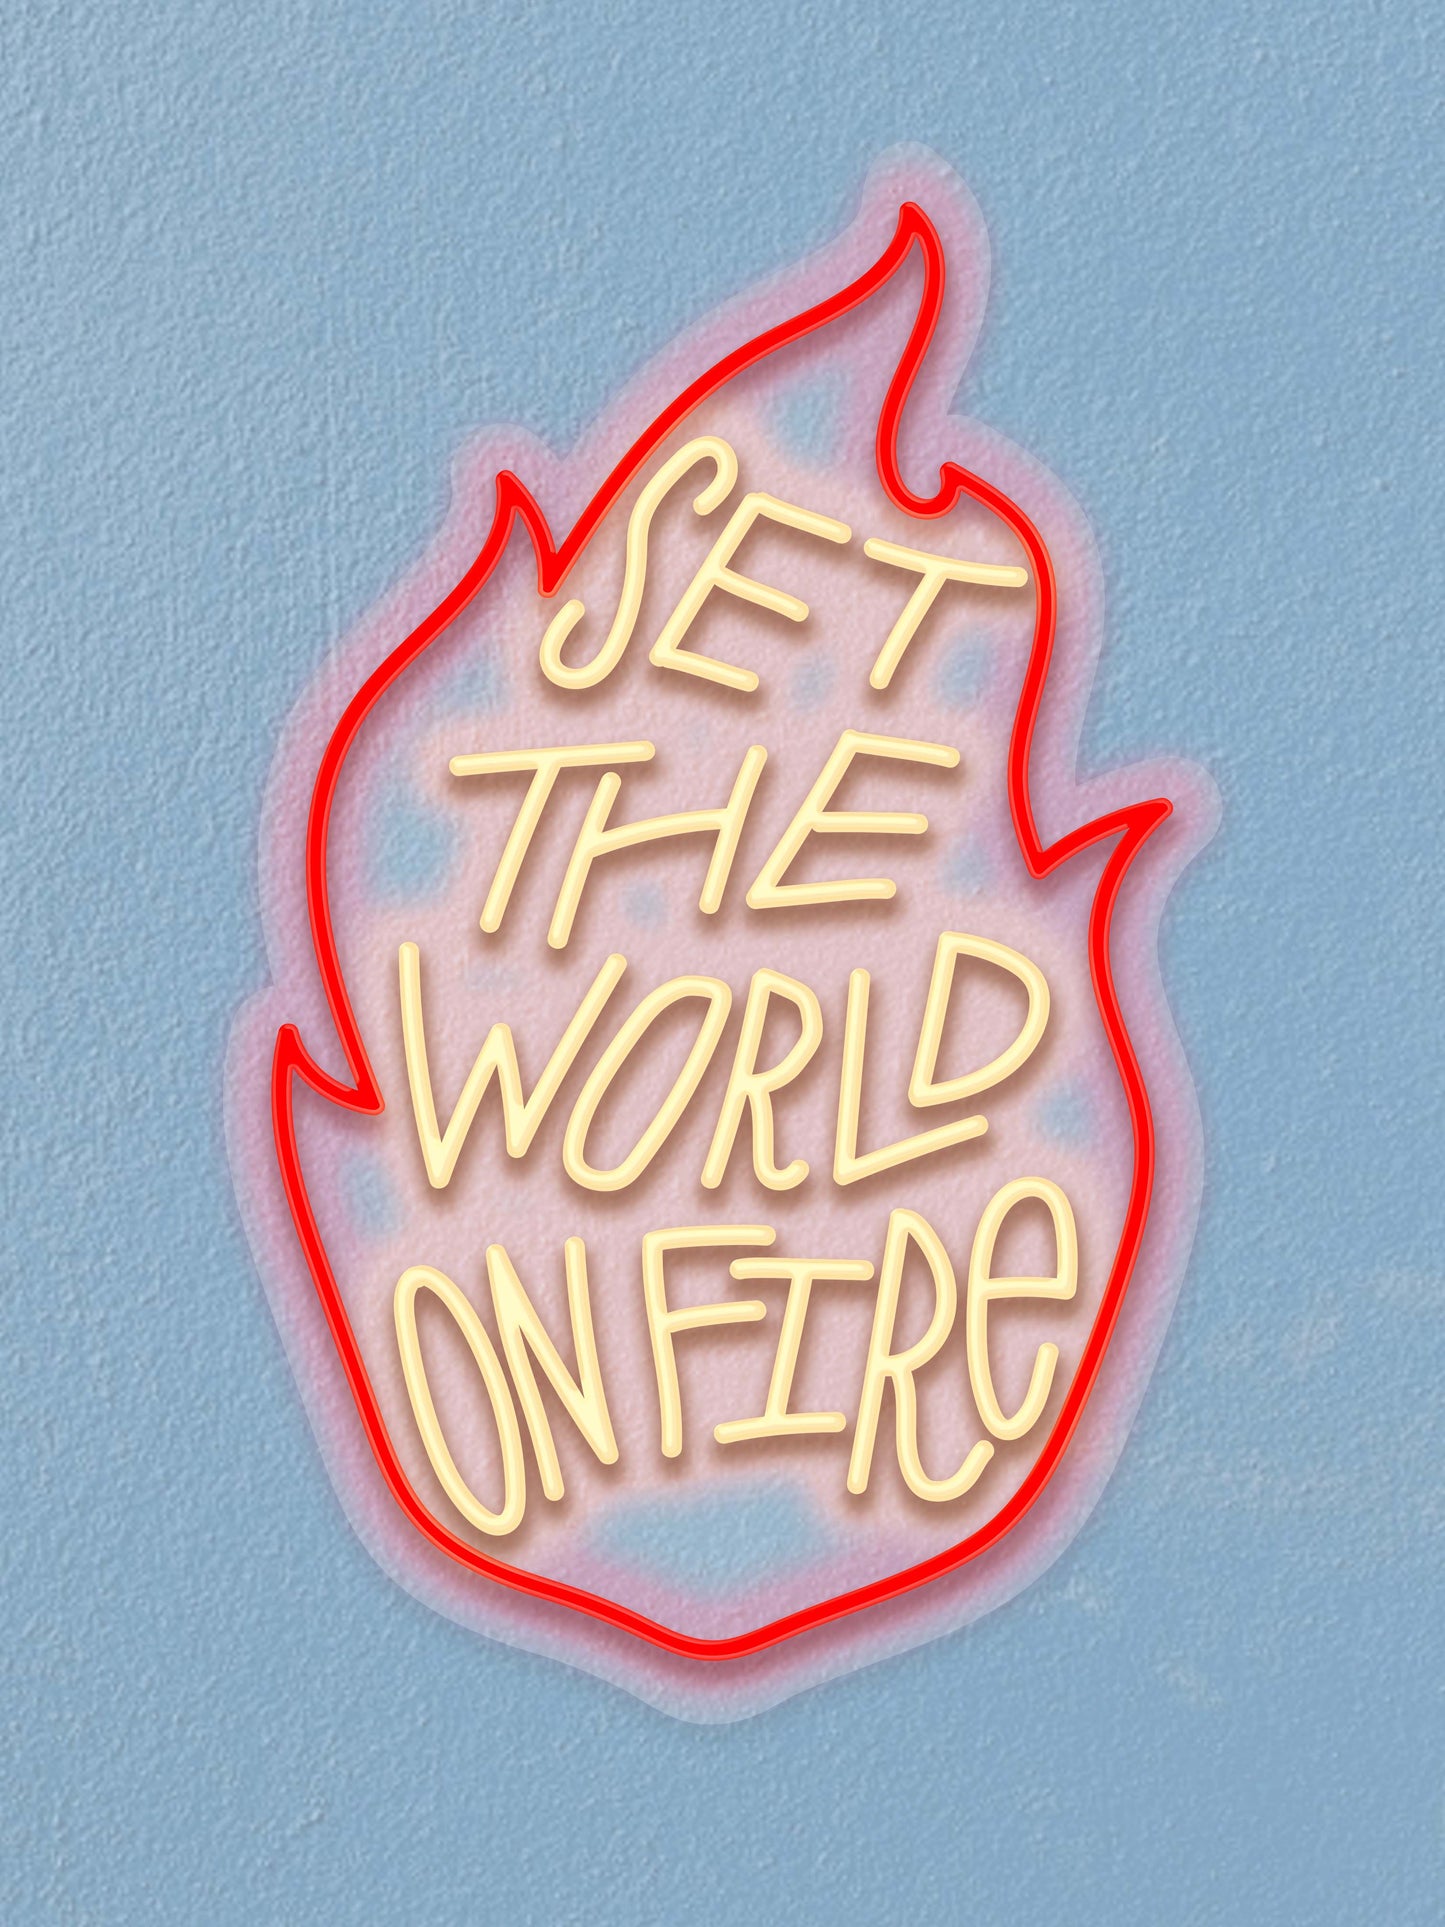 Set the world on fire